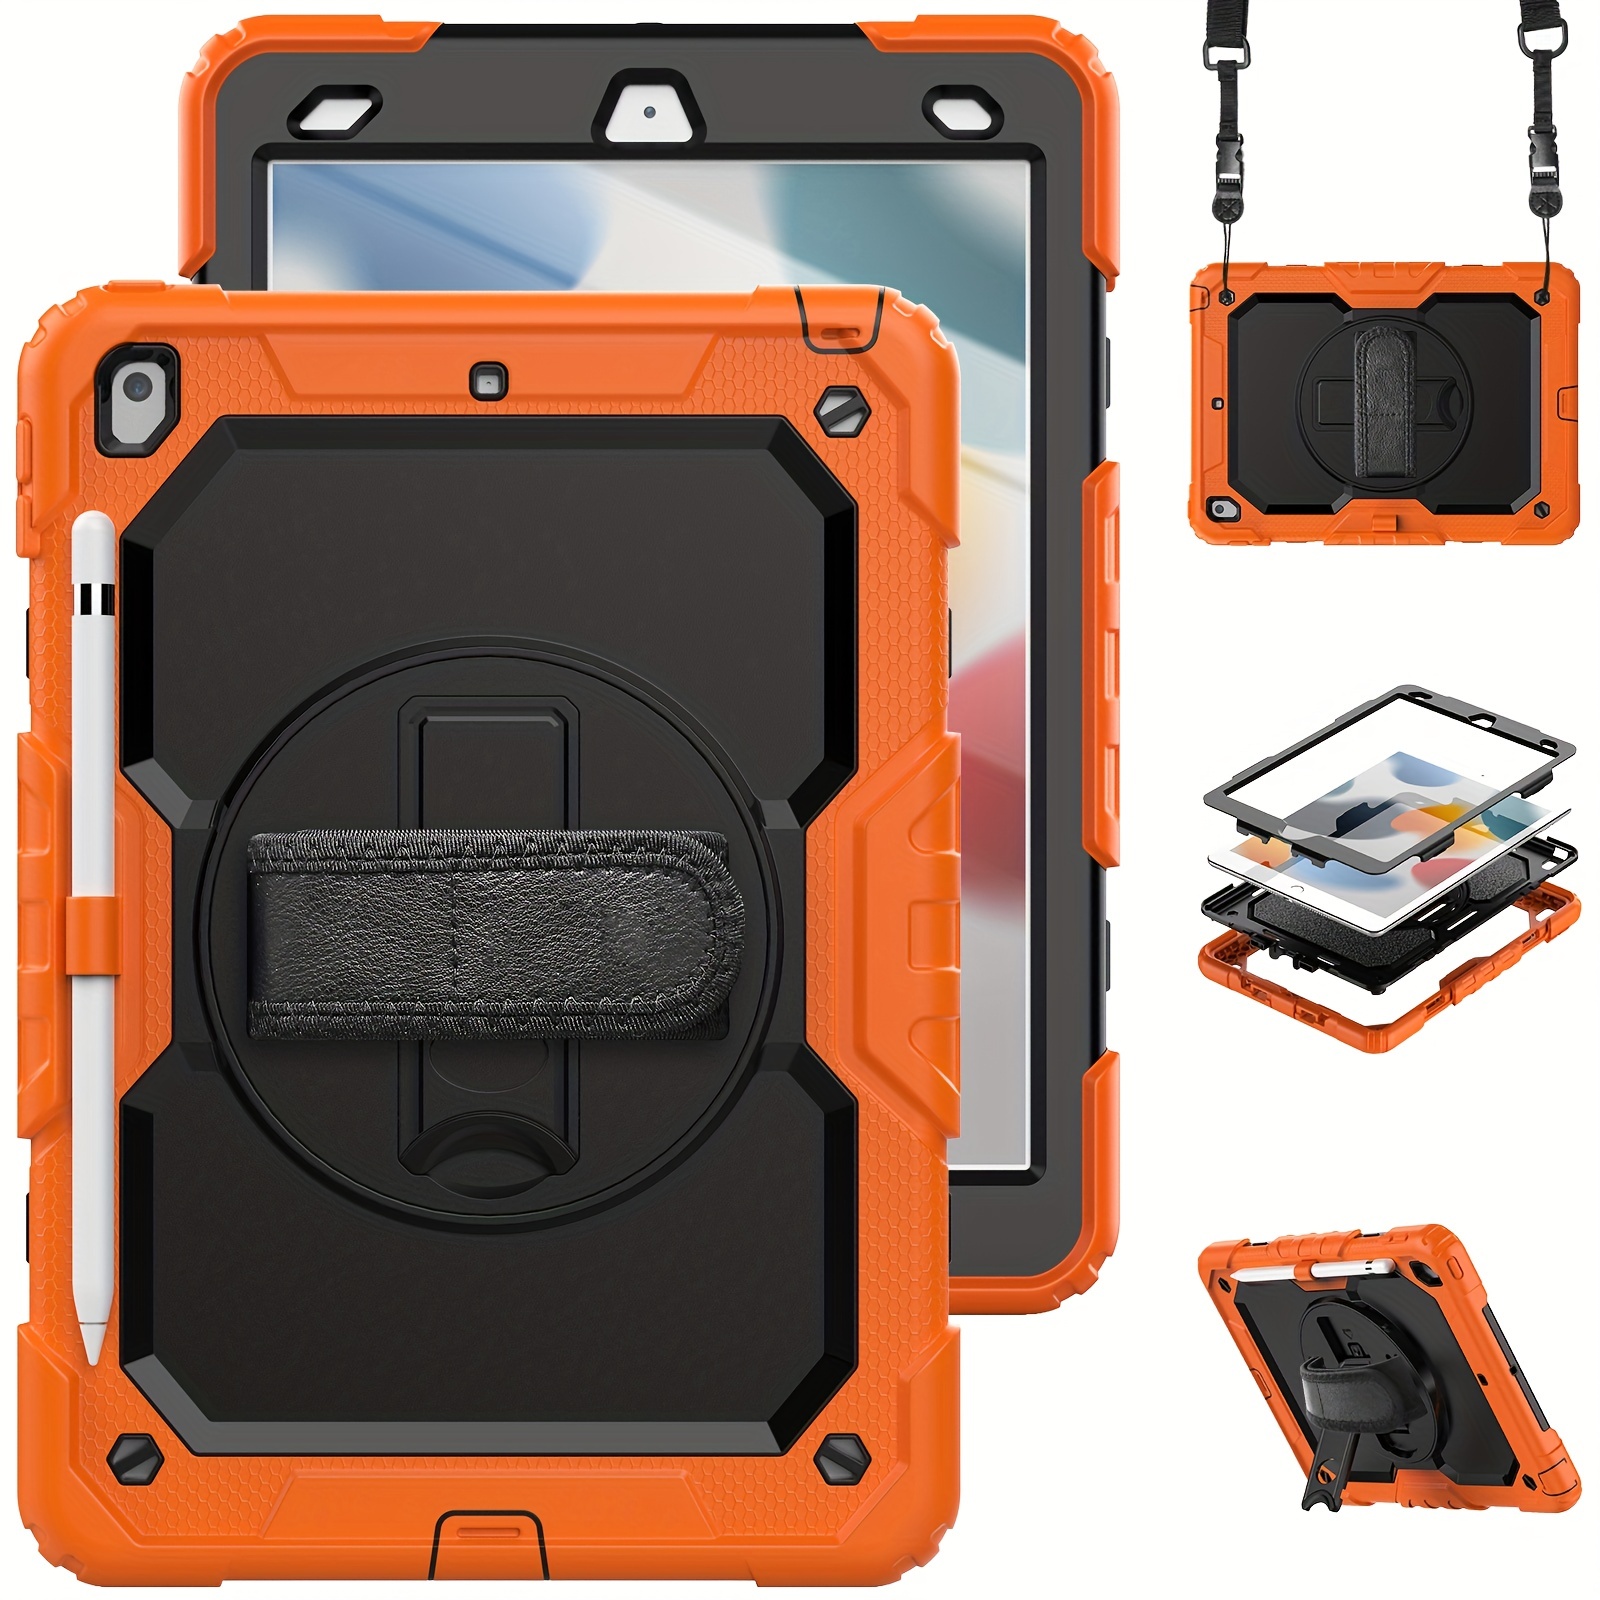 Shockproof Case For iPad 9 8 7 6 5th Gen Air 4 Mini6 5 Pro 11